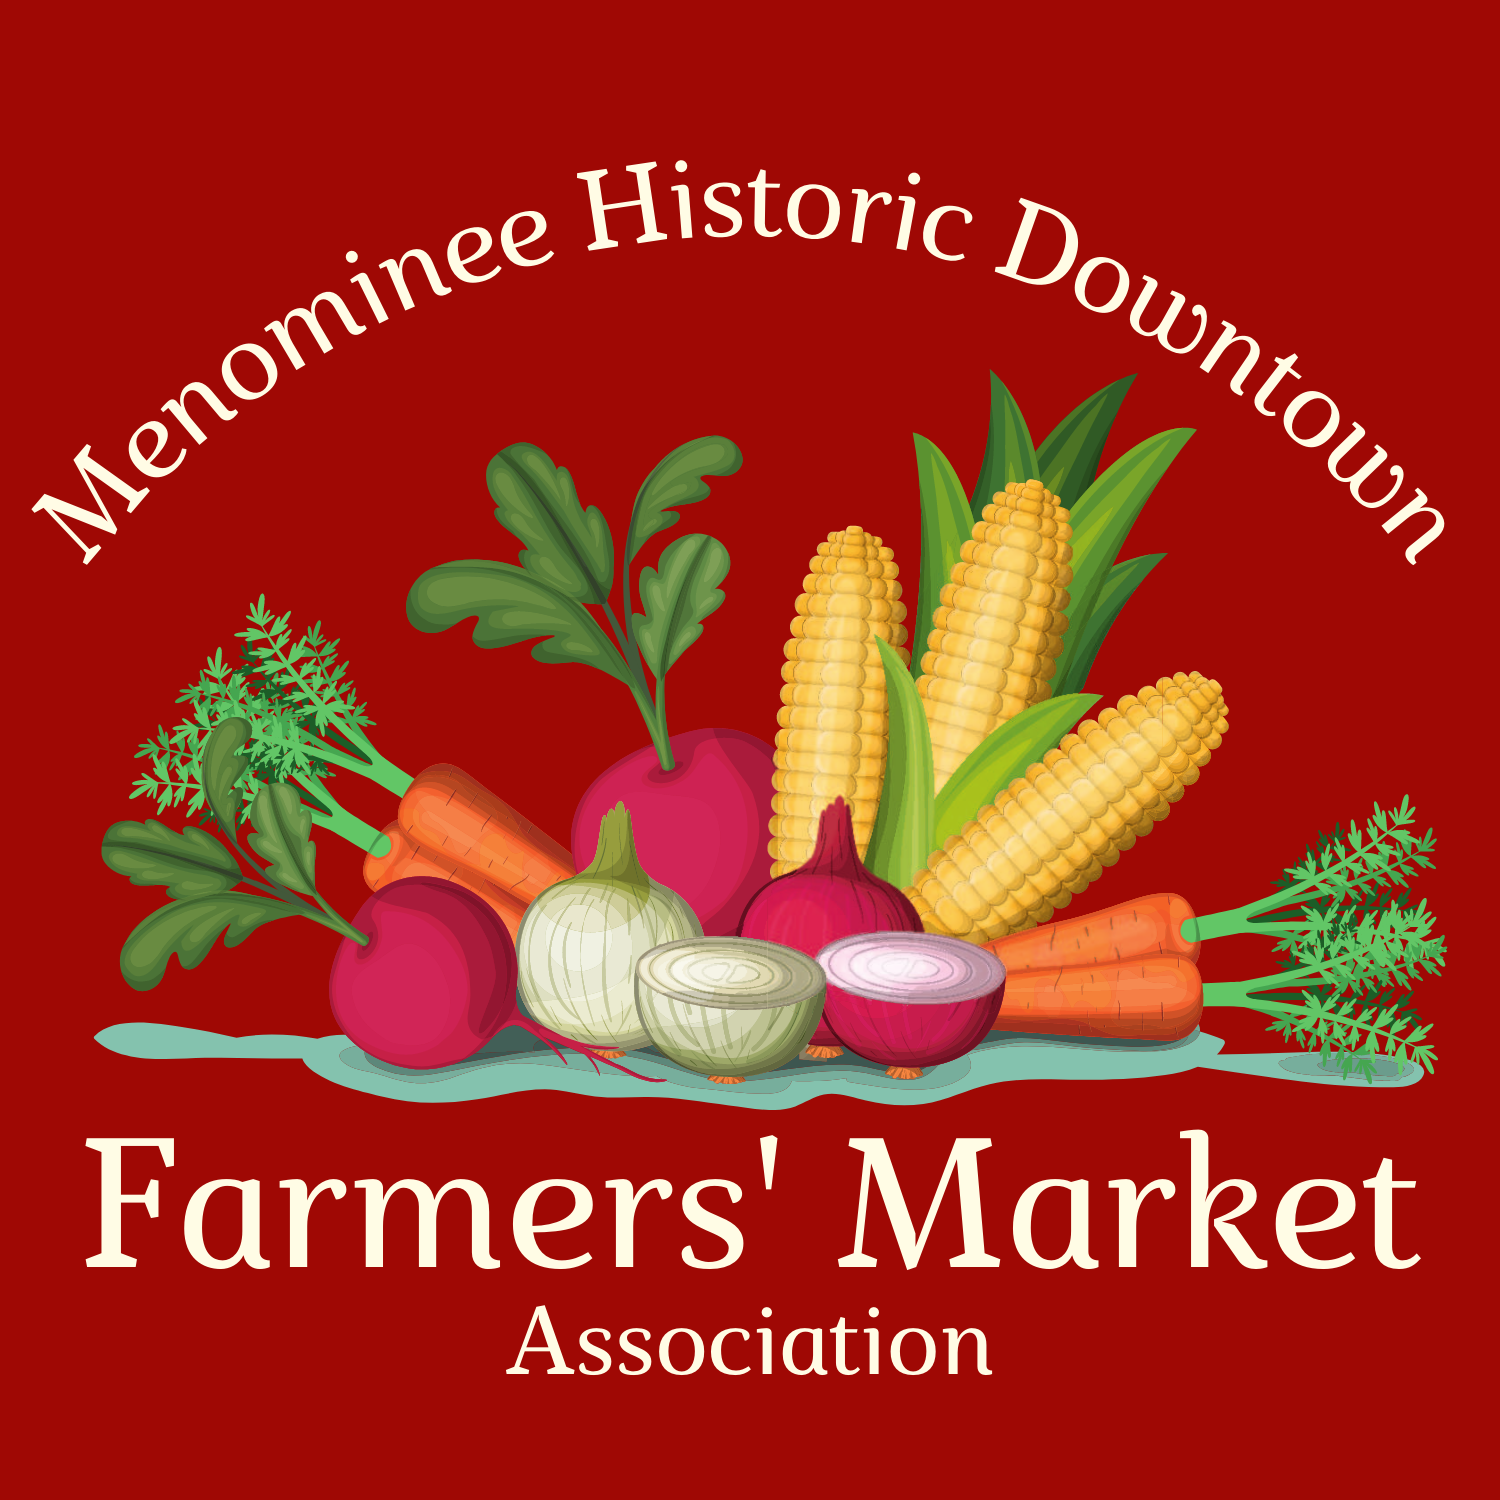 Menominee Historic Downtown Association Farmers' Market - Menominee Michigan - Logo - a variety of vegetables including radish, carrots, onions, and corn. Menominee Historical Downtown Farmers Market Association is written below in off yellow letters.